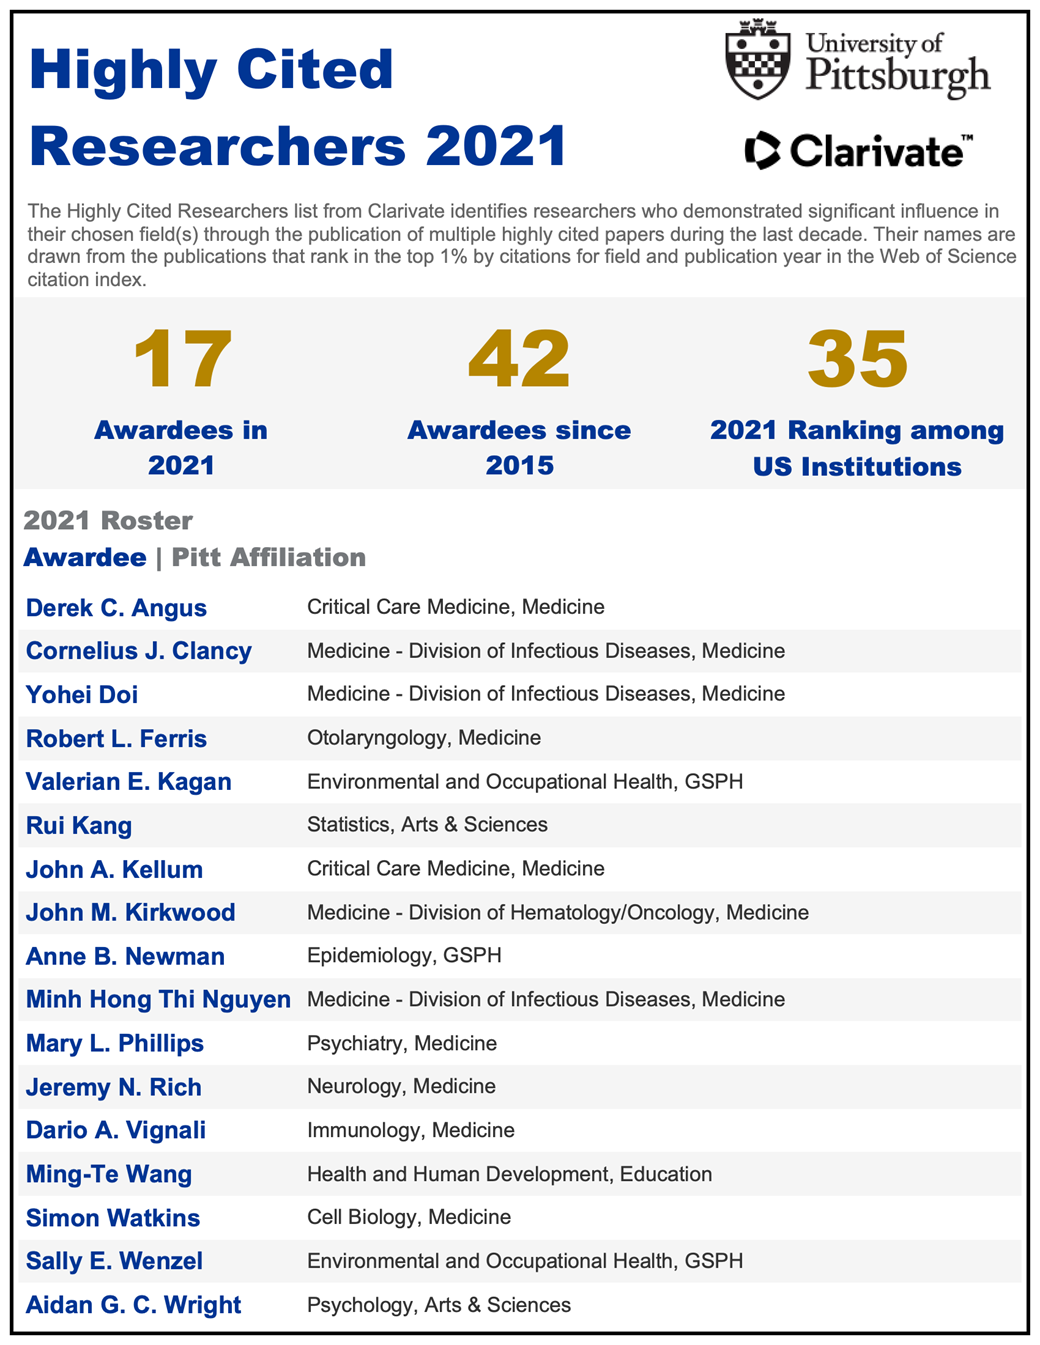 Highly Cited Researchers 2021 graph